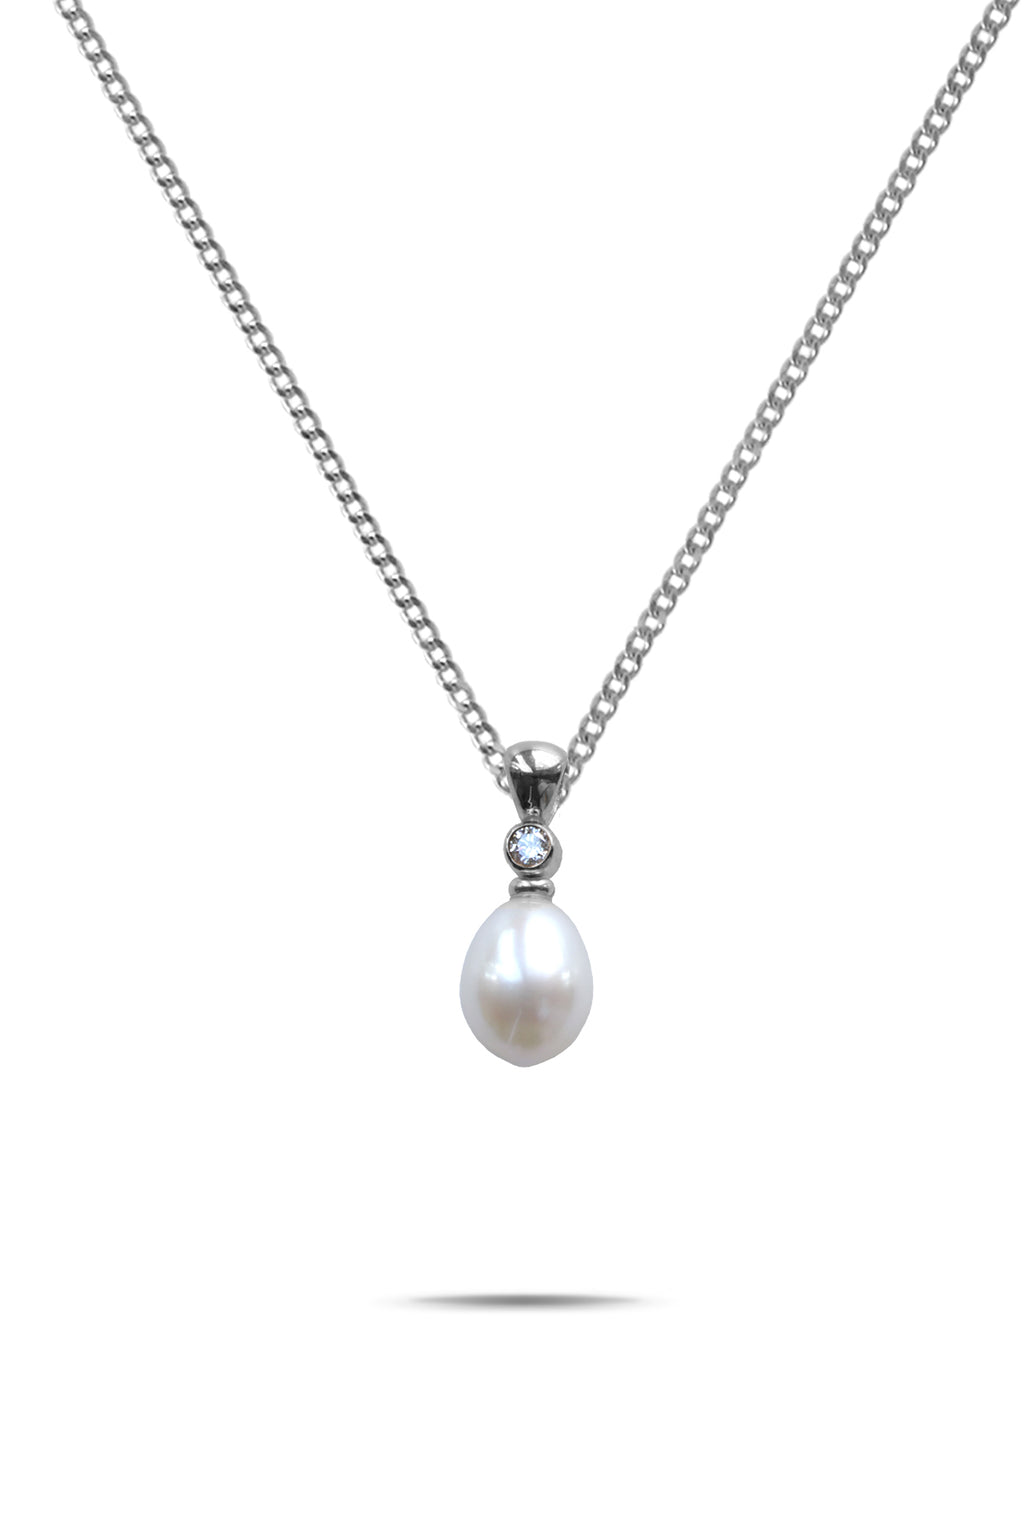 9ct White Gold Diamond and Freshwater Pearl Pendant